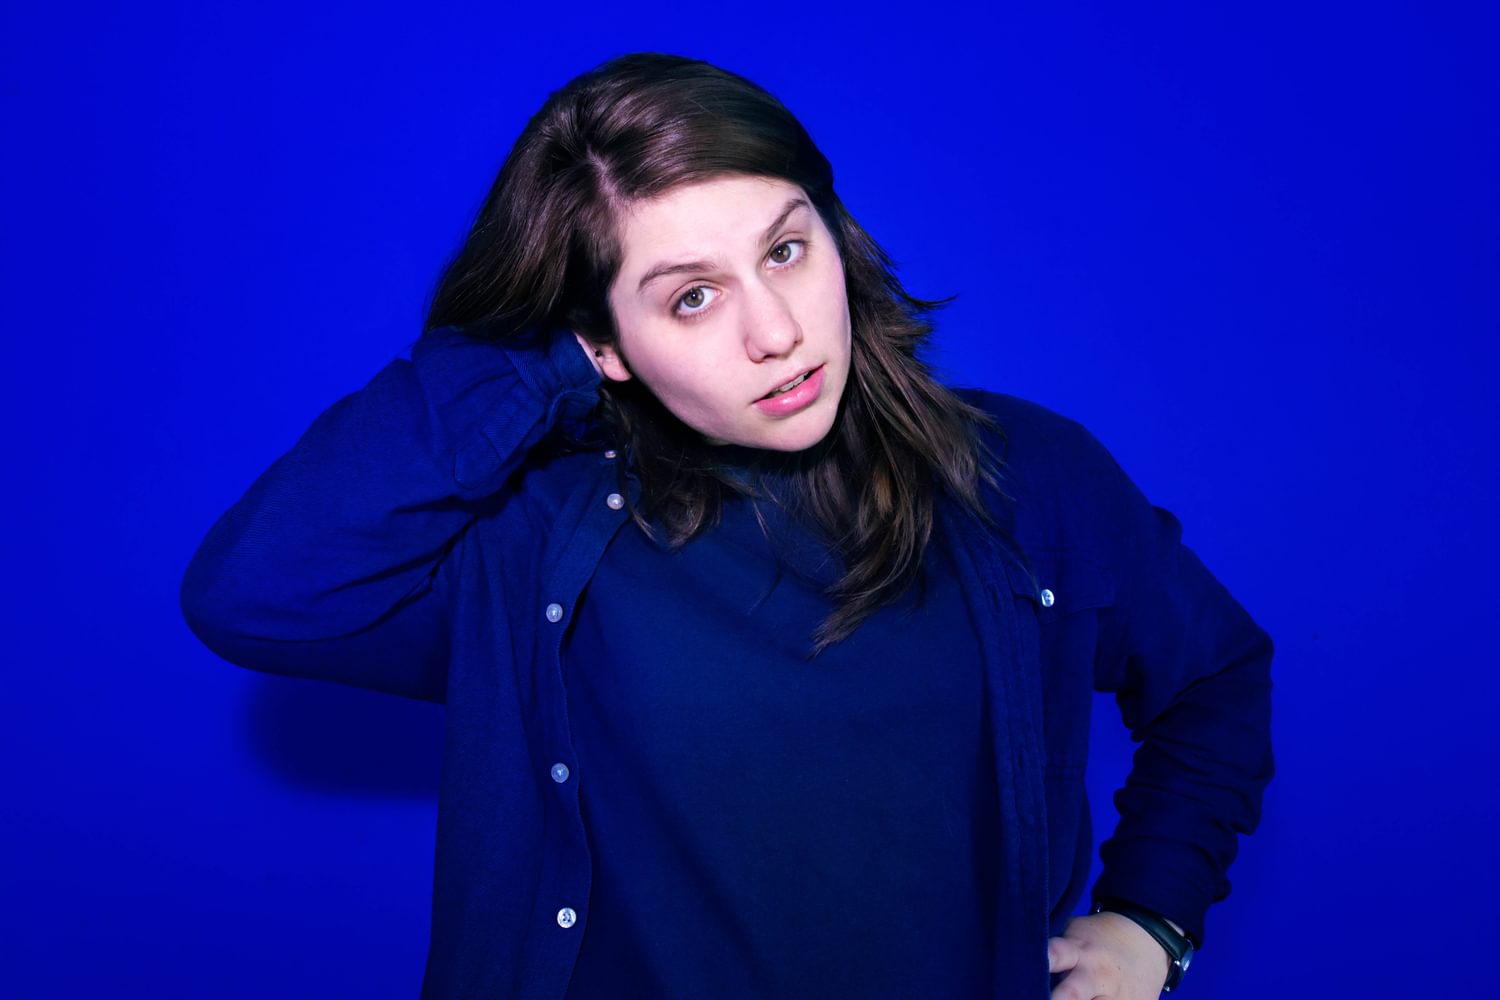 Alex Lahey announces debut album ‘I Love You Like A Brother’